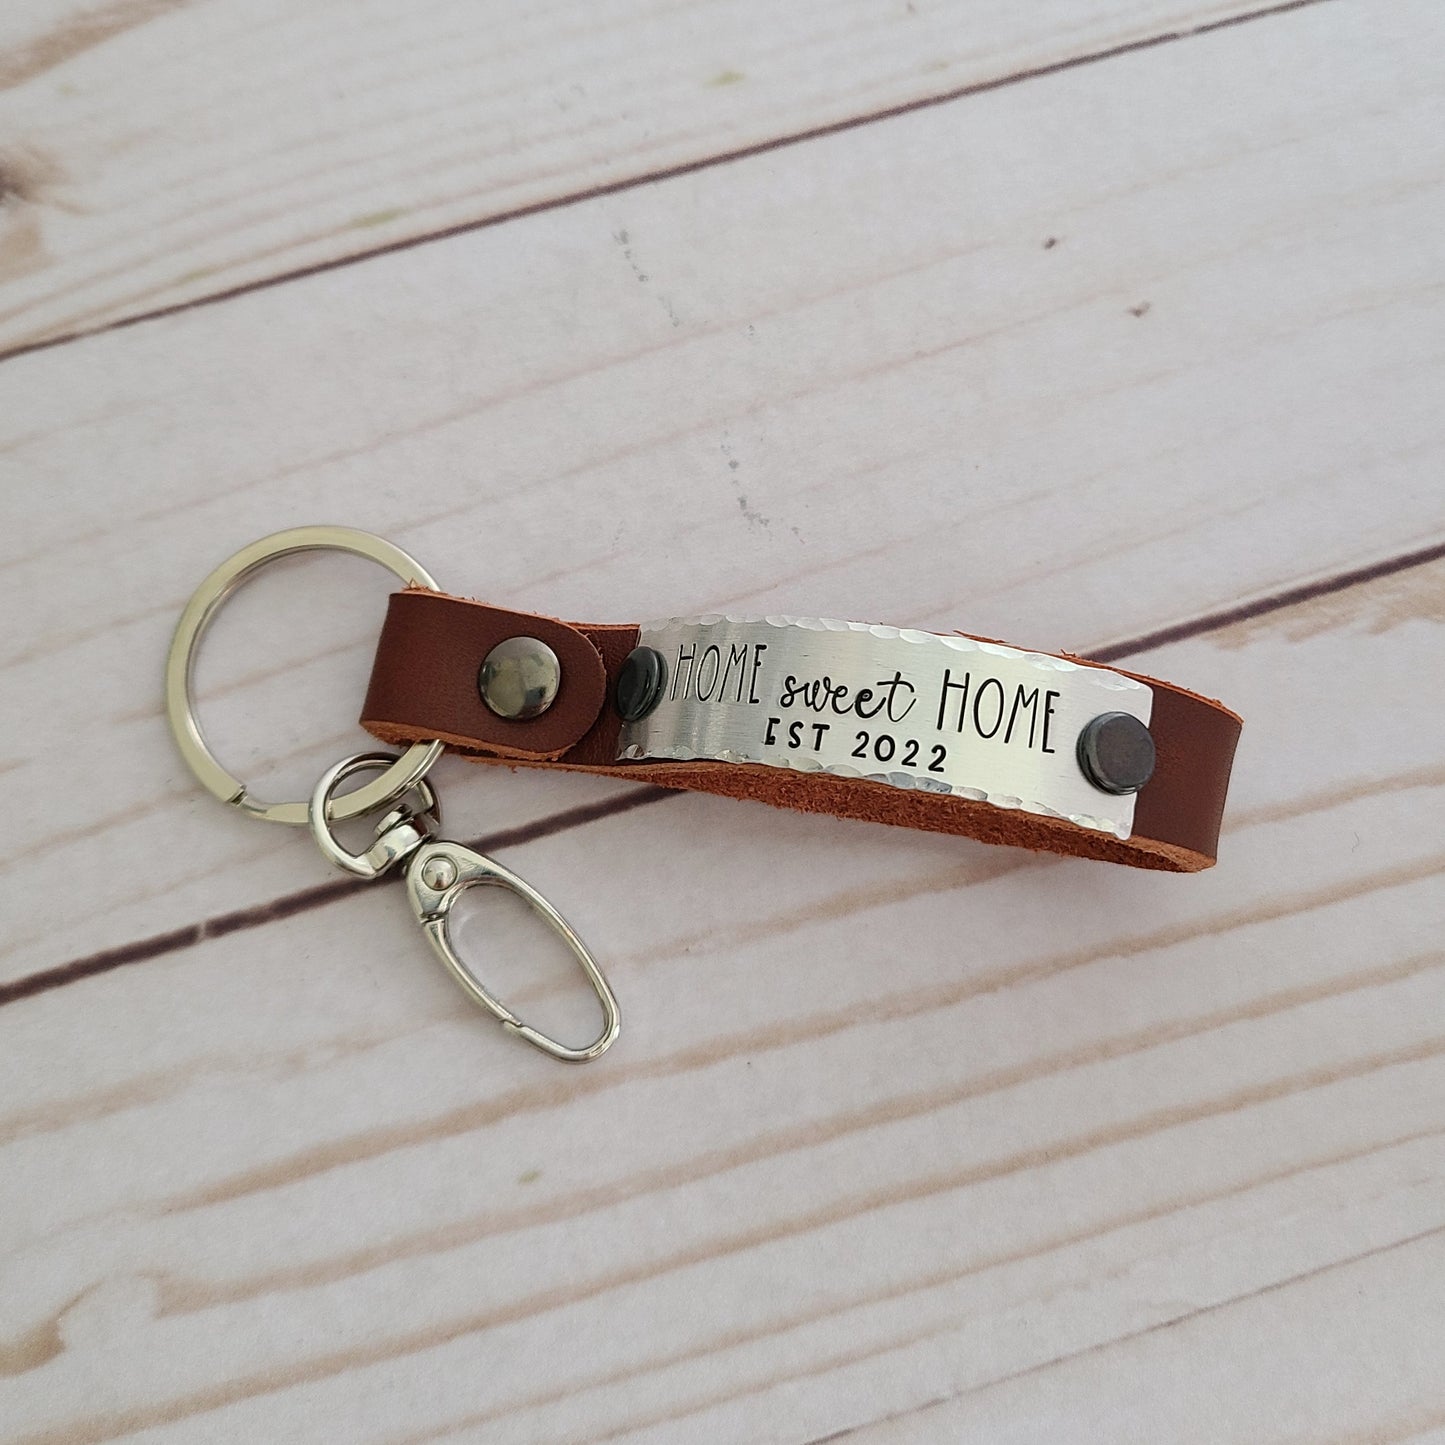 Home Sweet Home Est 2022 Leather Key Fob